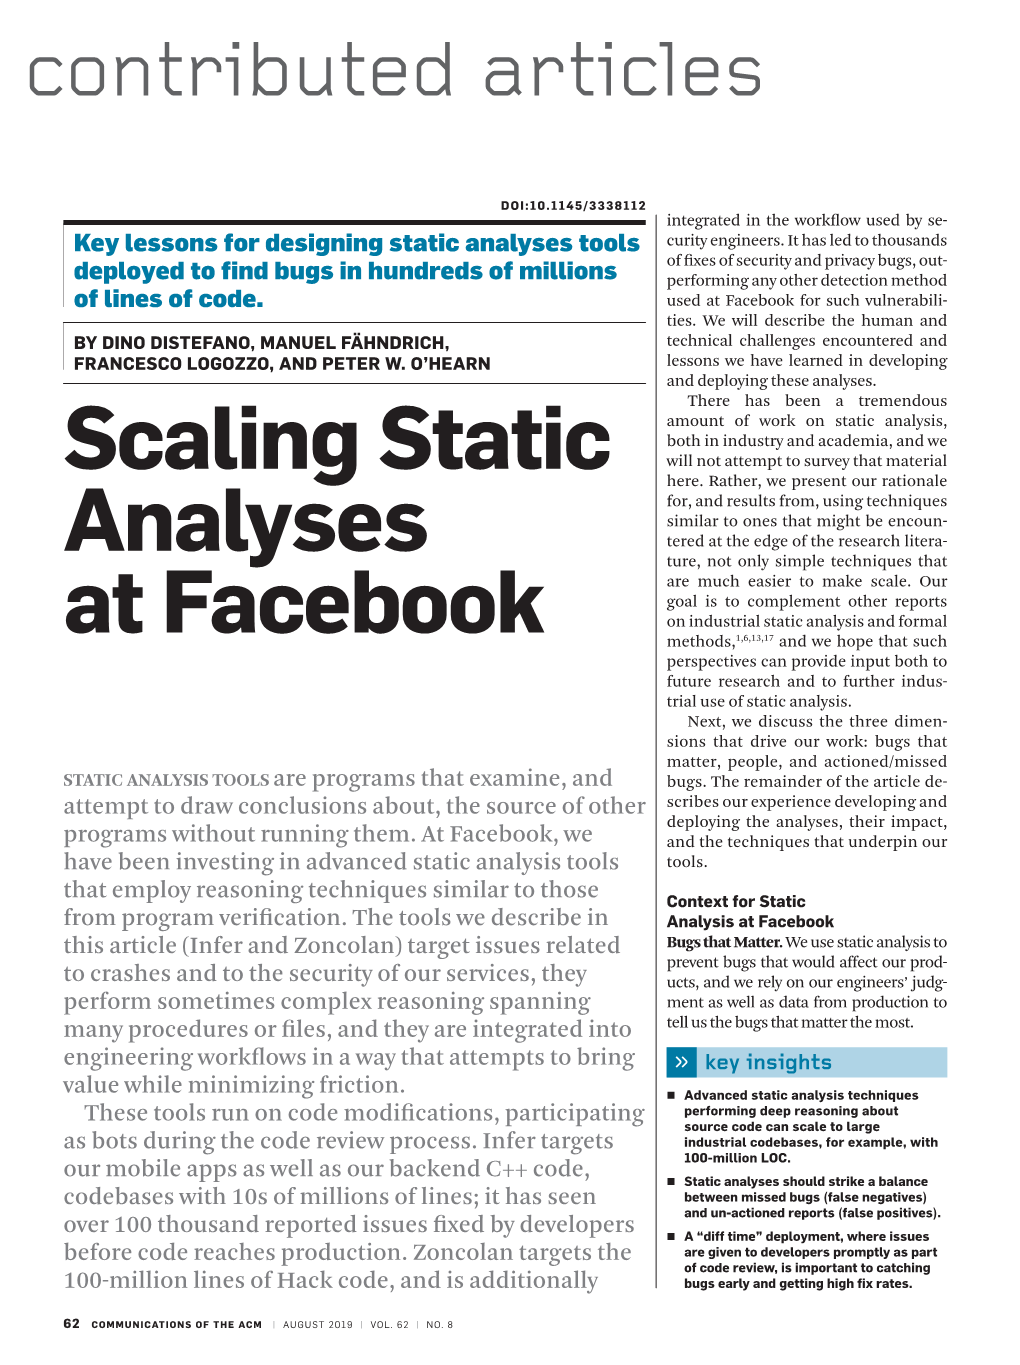 Scaling Static Analyses at Facebook